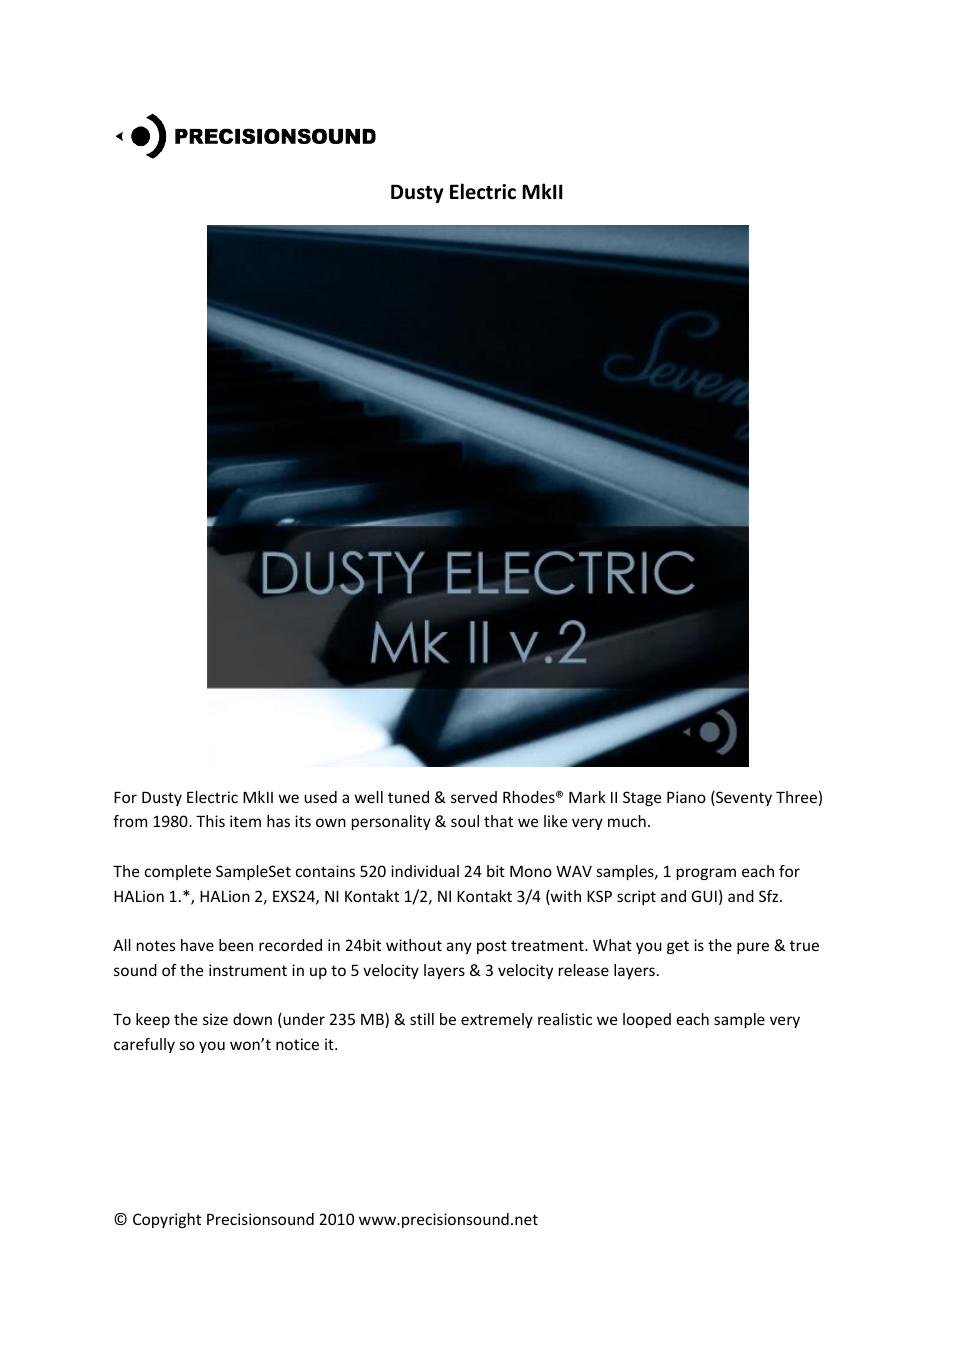 Dusty Electric MkII